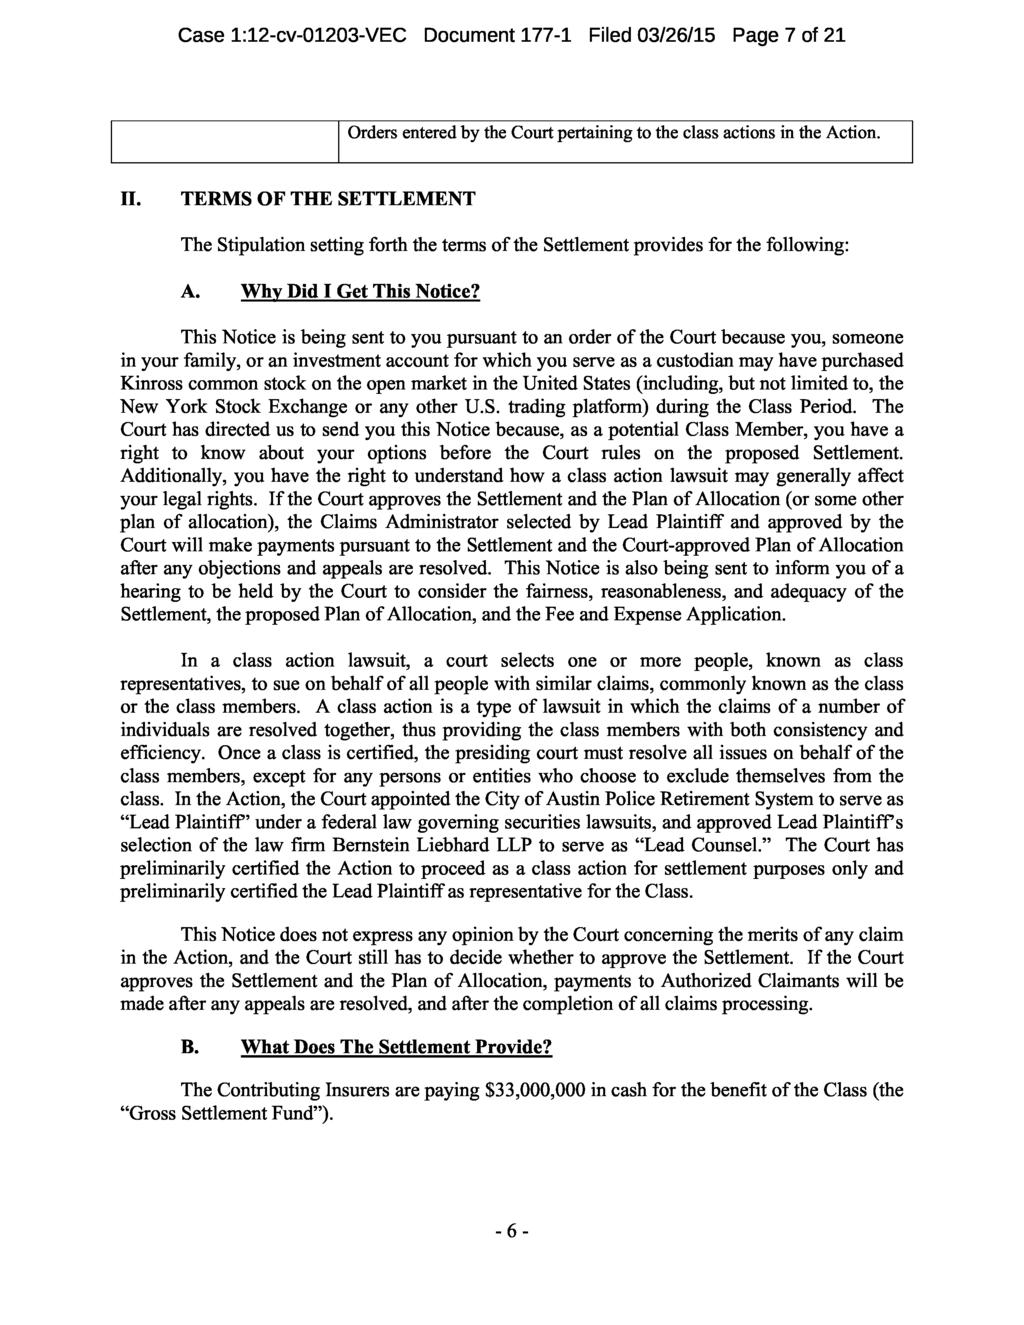 Case 1:12-cv-01203-VEC Document 177-1 Filed 03/26/15 Page 7 of 21 Orders entered by the Court pertaining to the class actions in the Action. II.